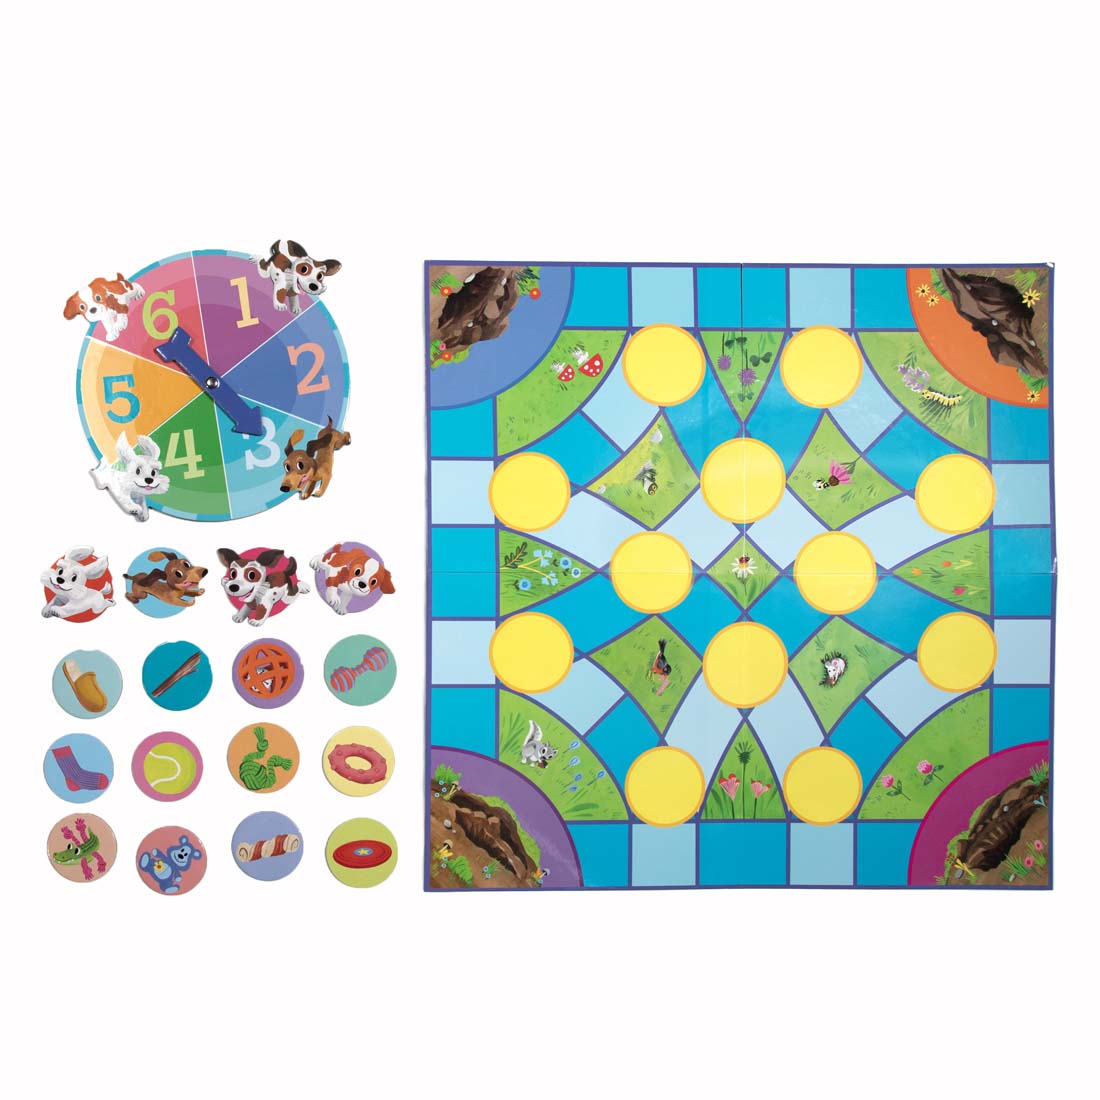 Puppy Fuffle Shaped Board Game